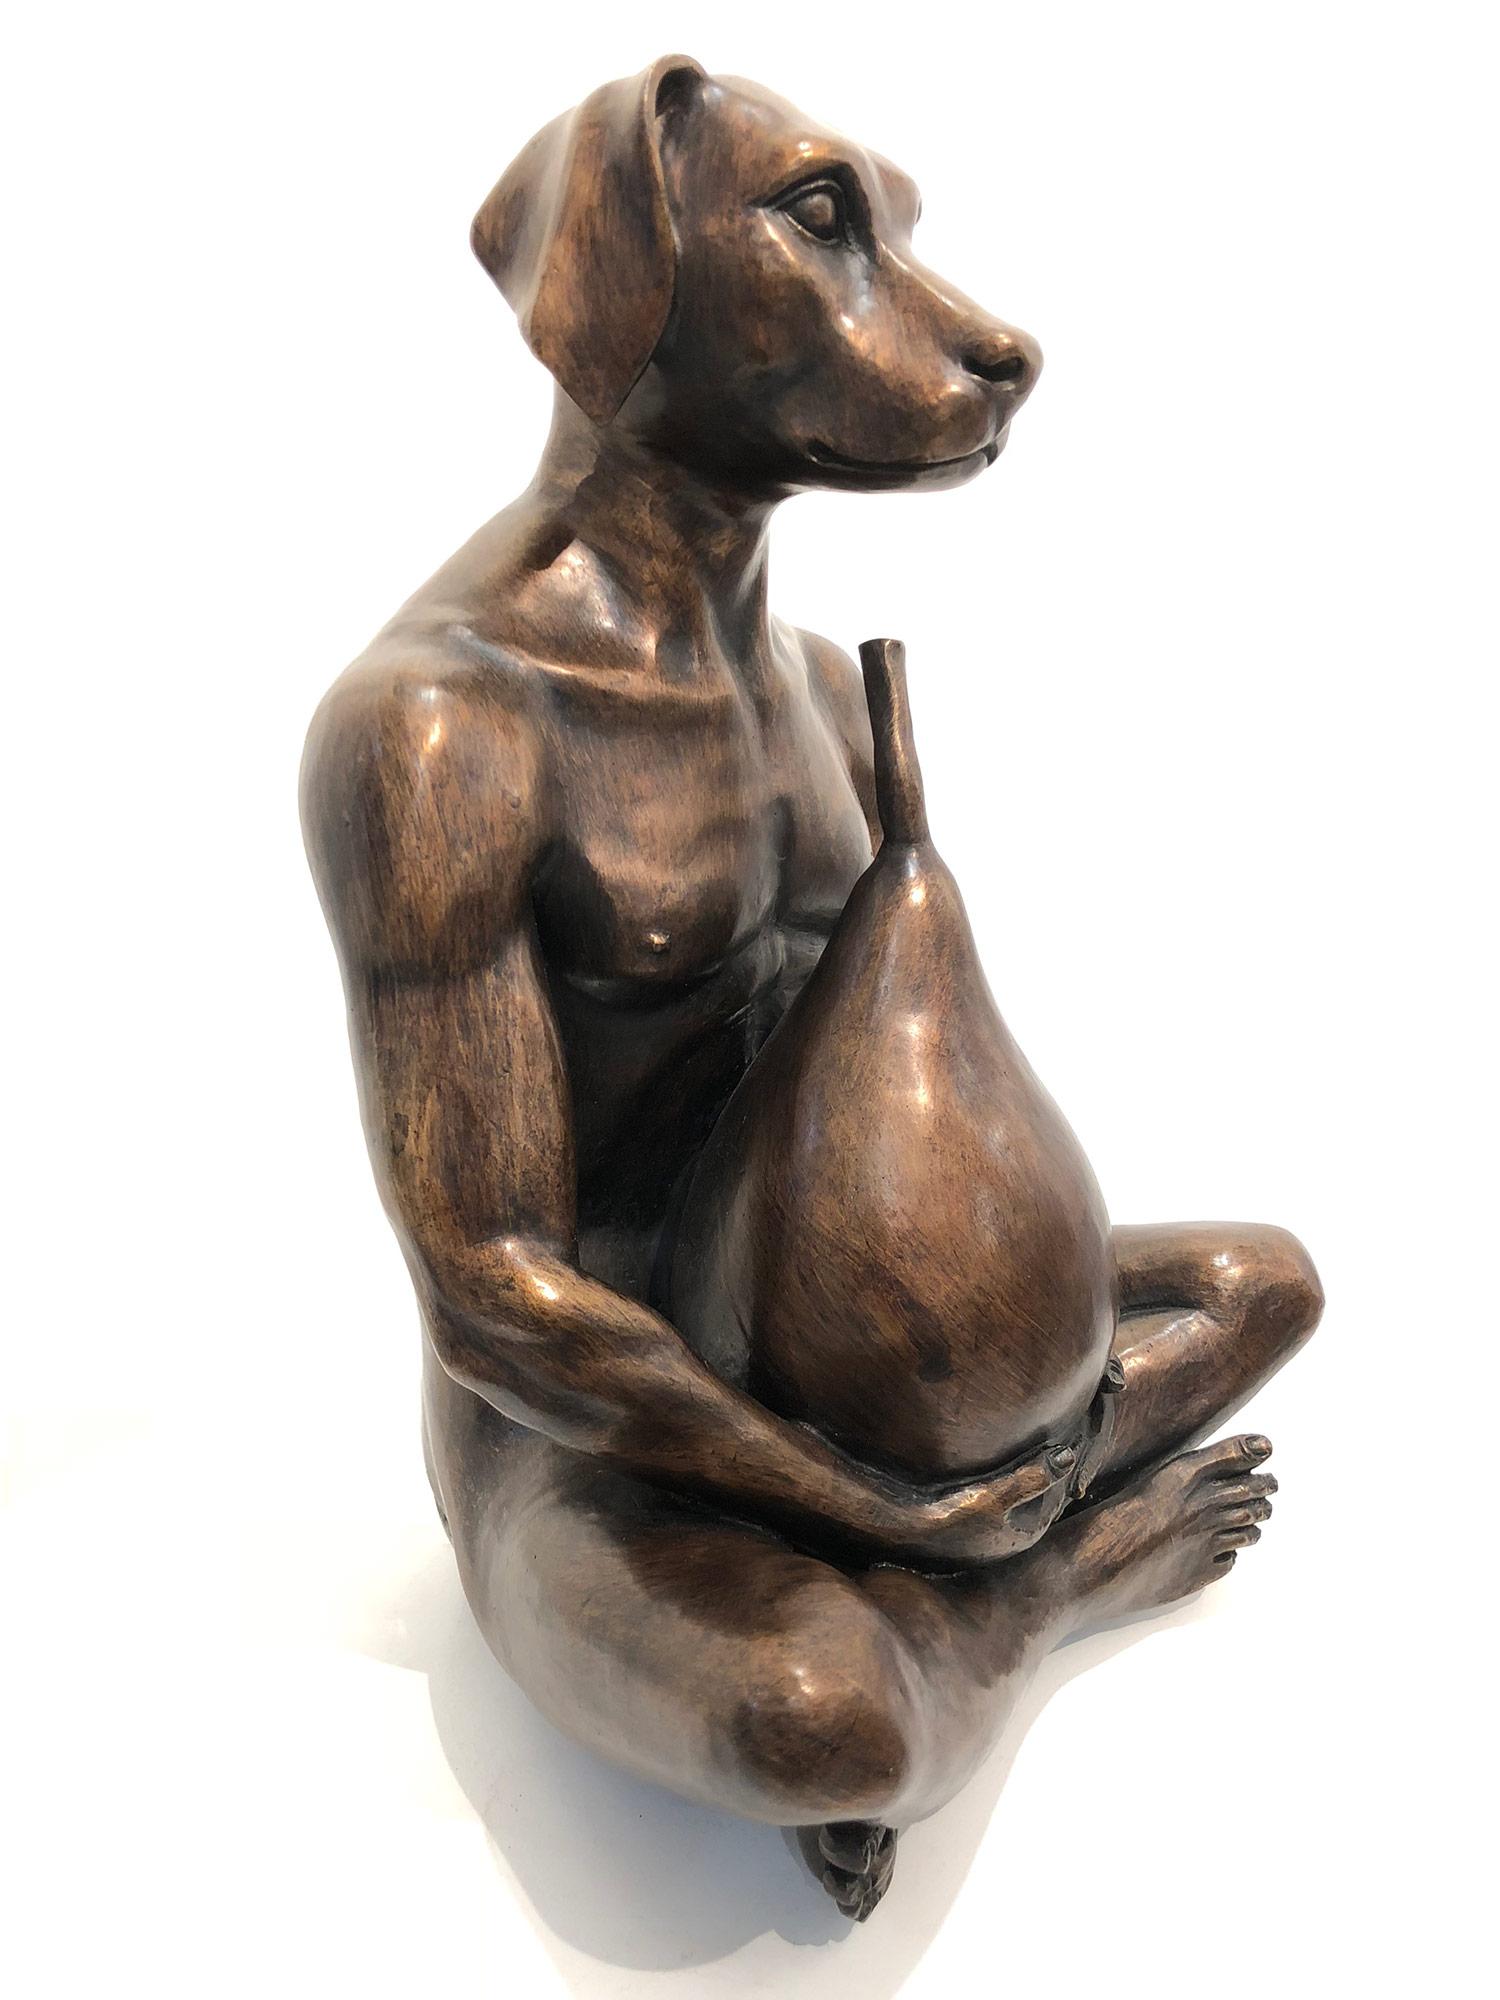 A whimsical yet very strong piece depicting Gillie and Marc’s Forbidden Pear sculpture. A beautiful and unique statement piece made from bronze. The forbidden pear represents the temptation of our inner desires and reflects how we should nurture